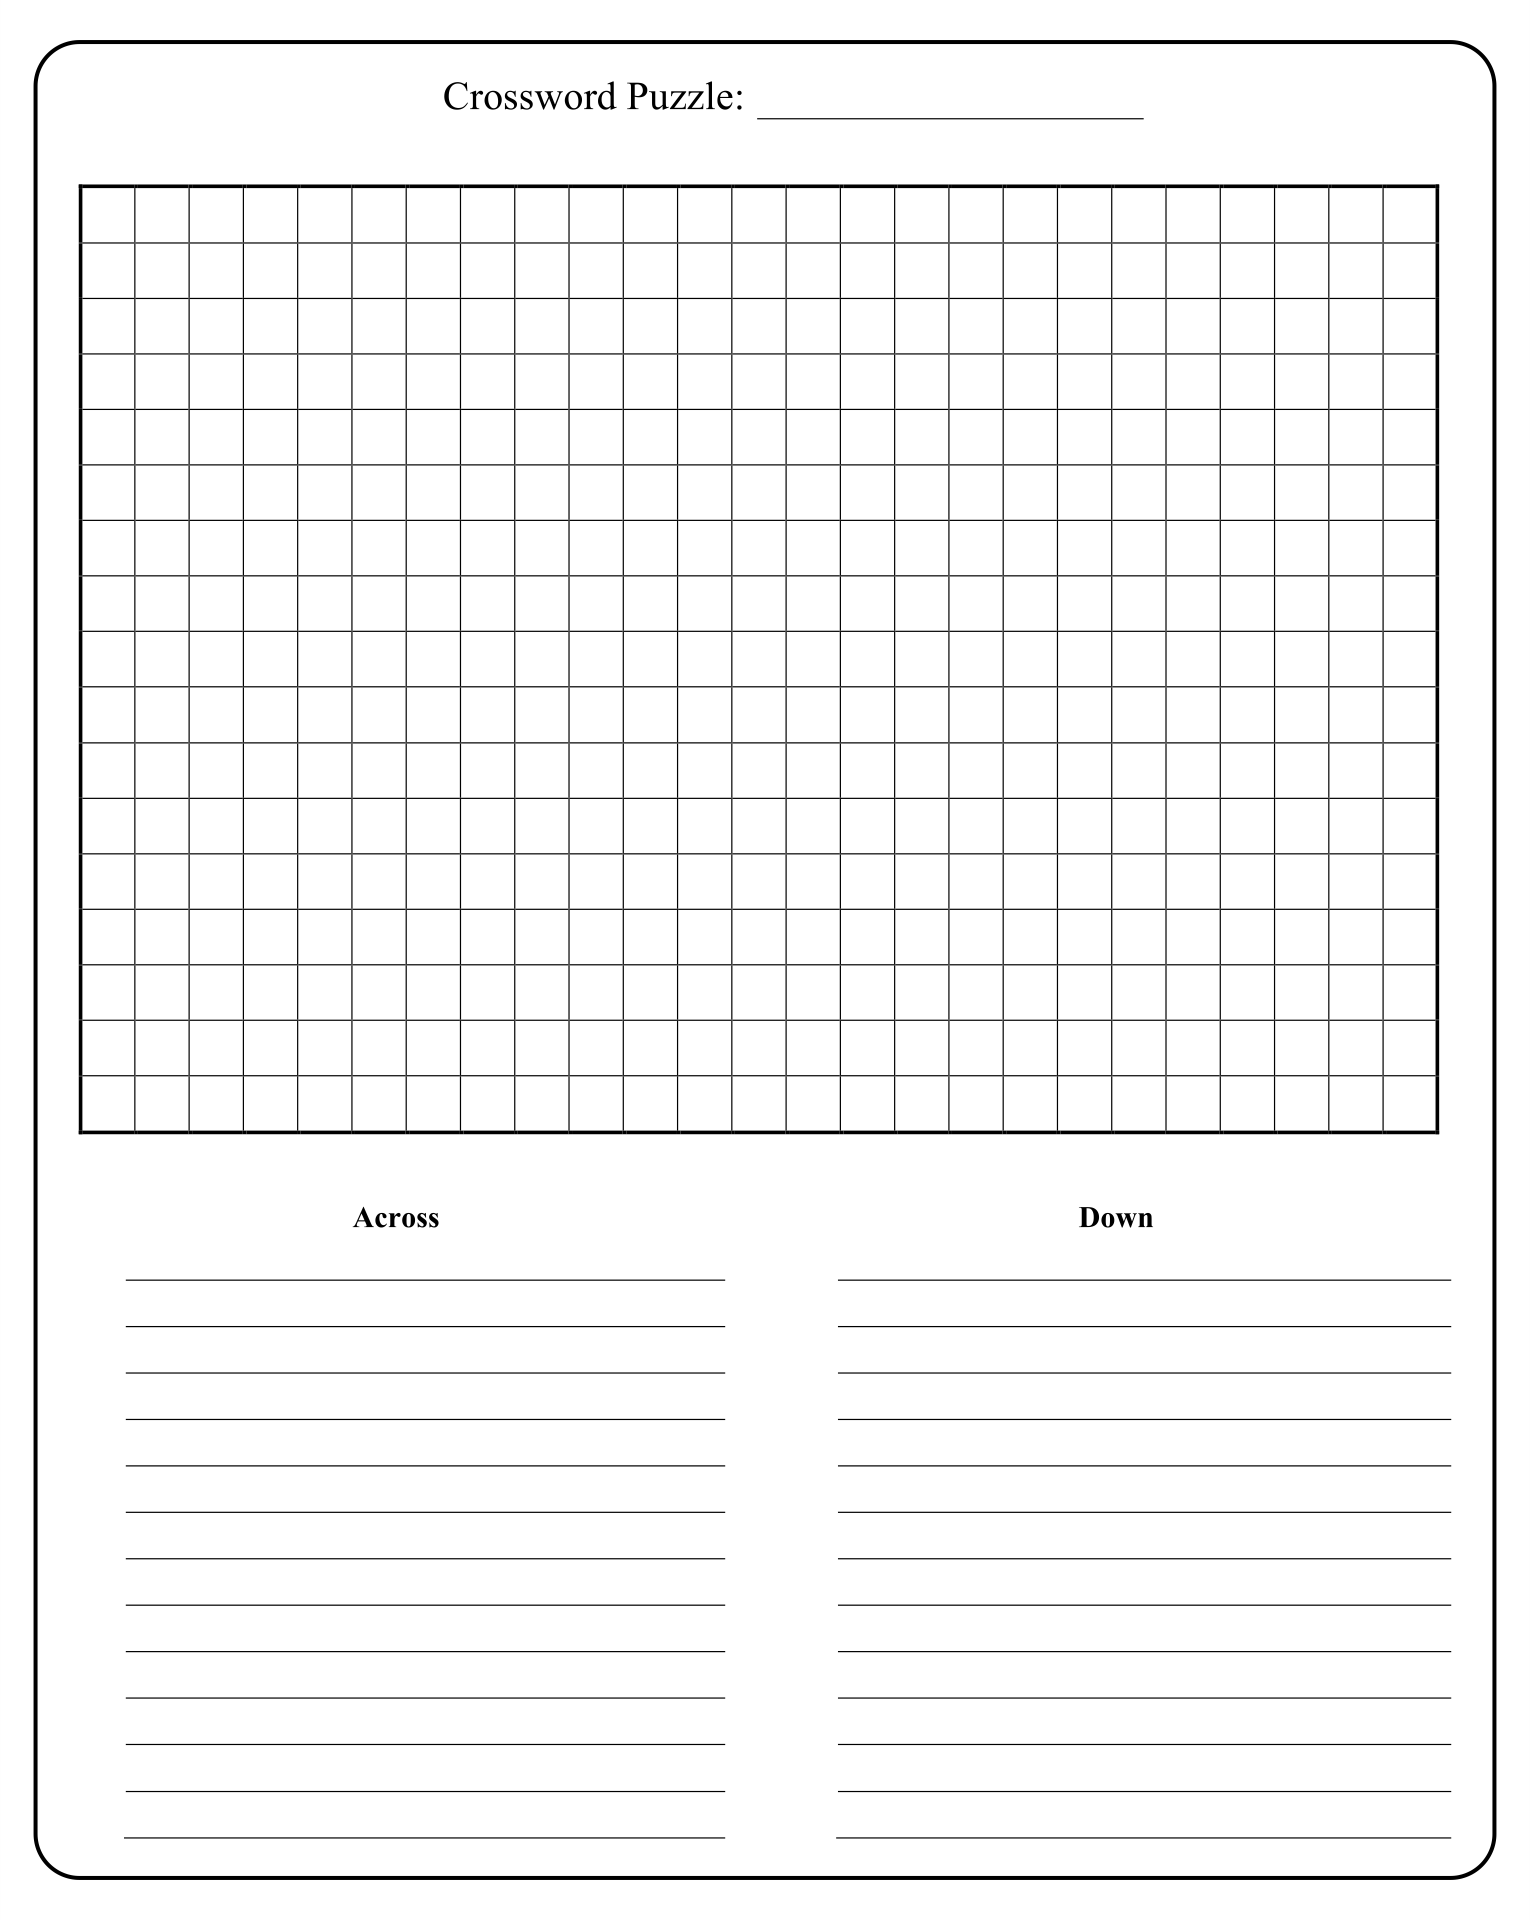 Blank Crossword Puzzle Template